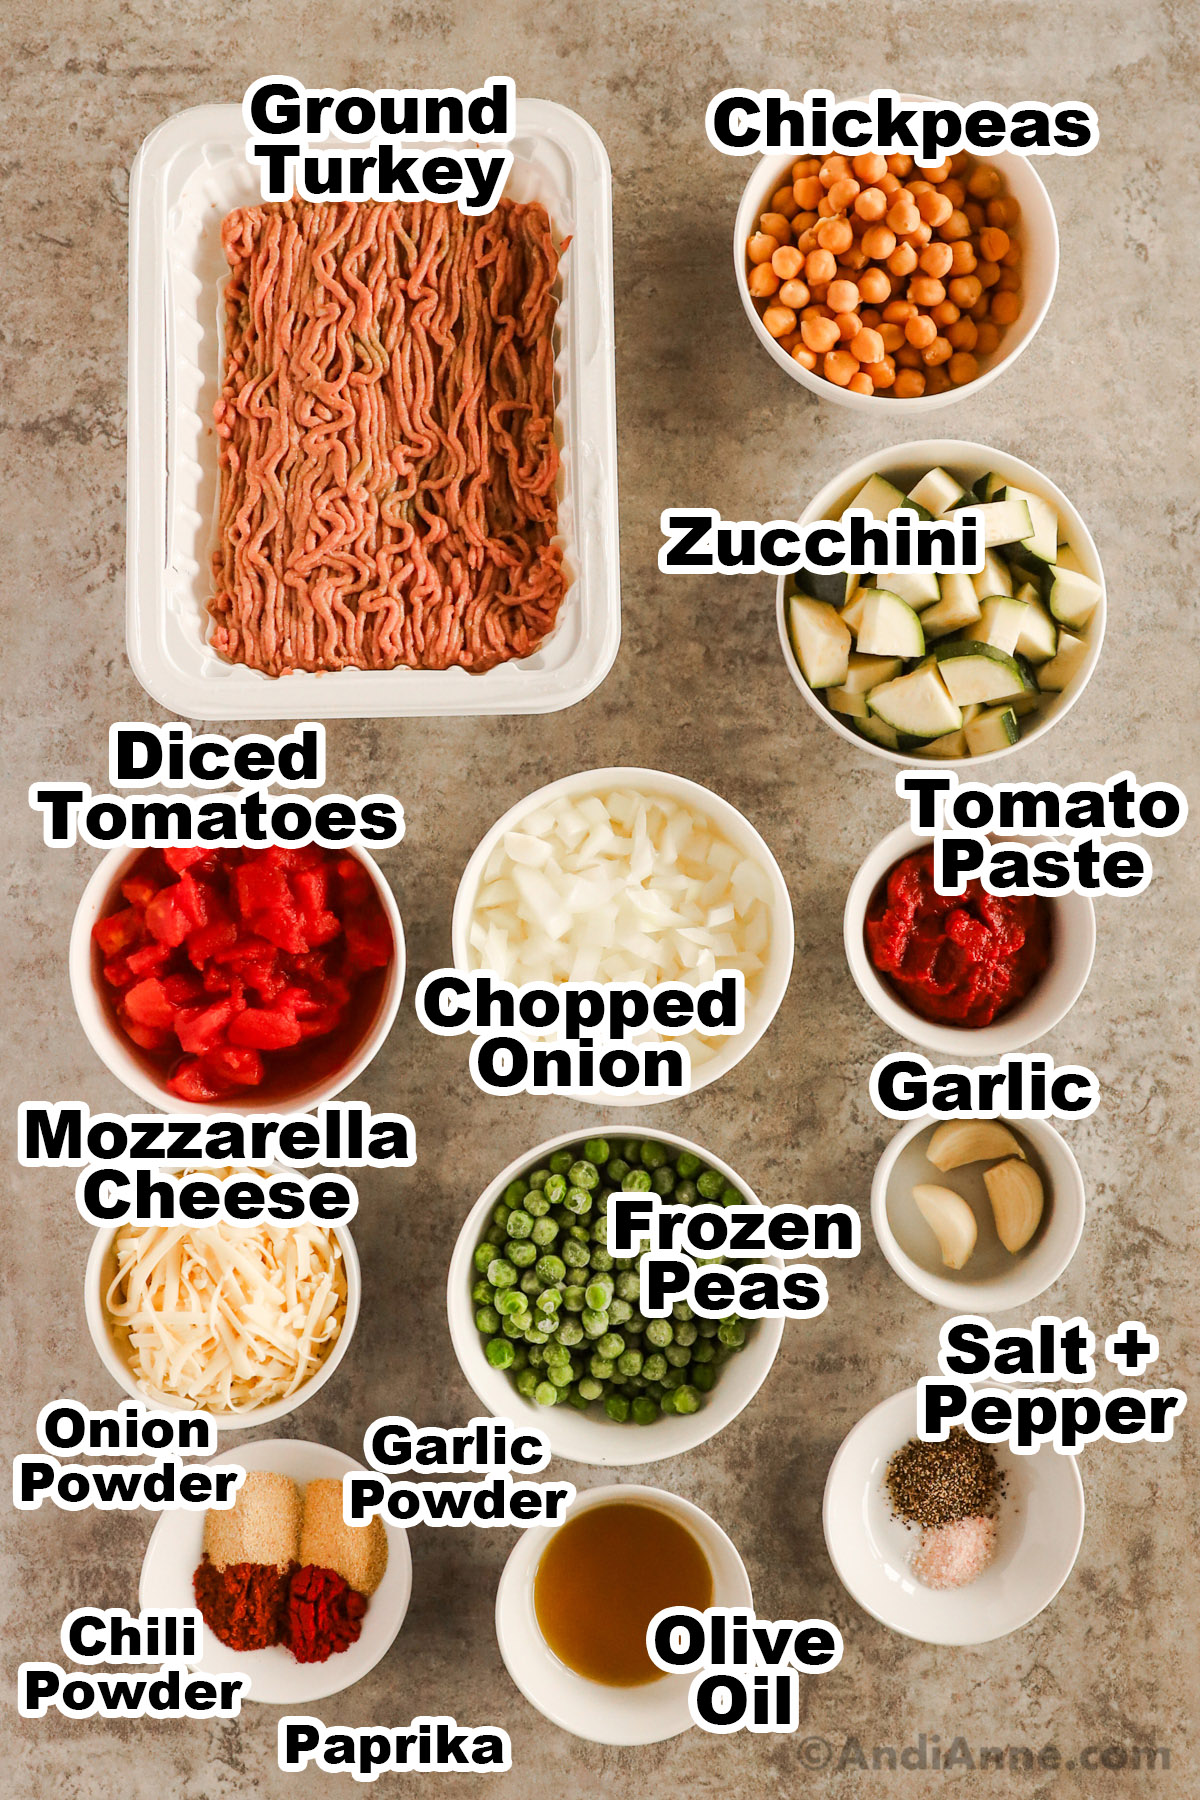 Recipe ingredients including ground turkey, bowl of chickpeas, chopped zucchini, diced tomatoes, chopped onion, tomato paste, shredded mozzarella, frozen peas, garlic cloves, olive oil, salt and pepper, and spices.